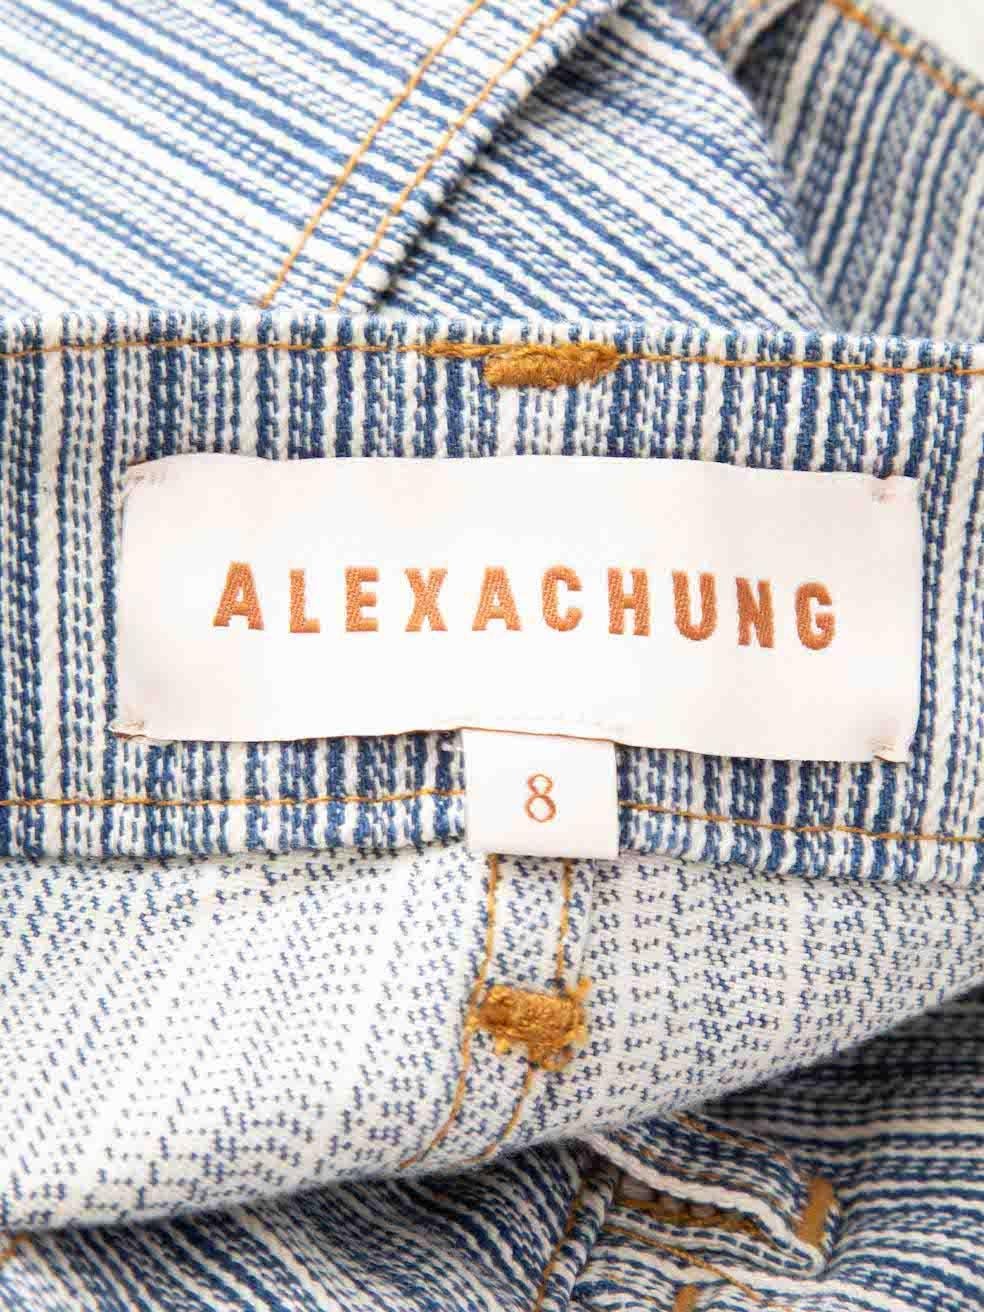 Alexa Chung Blue Denim Striped Mini Skirt Size S In Excellent Condition For Sale In London, GB